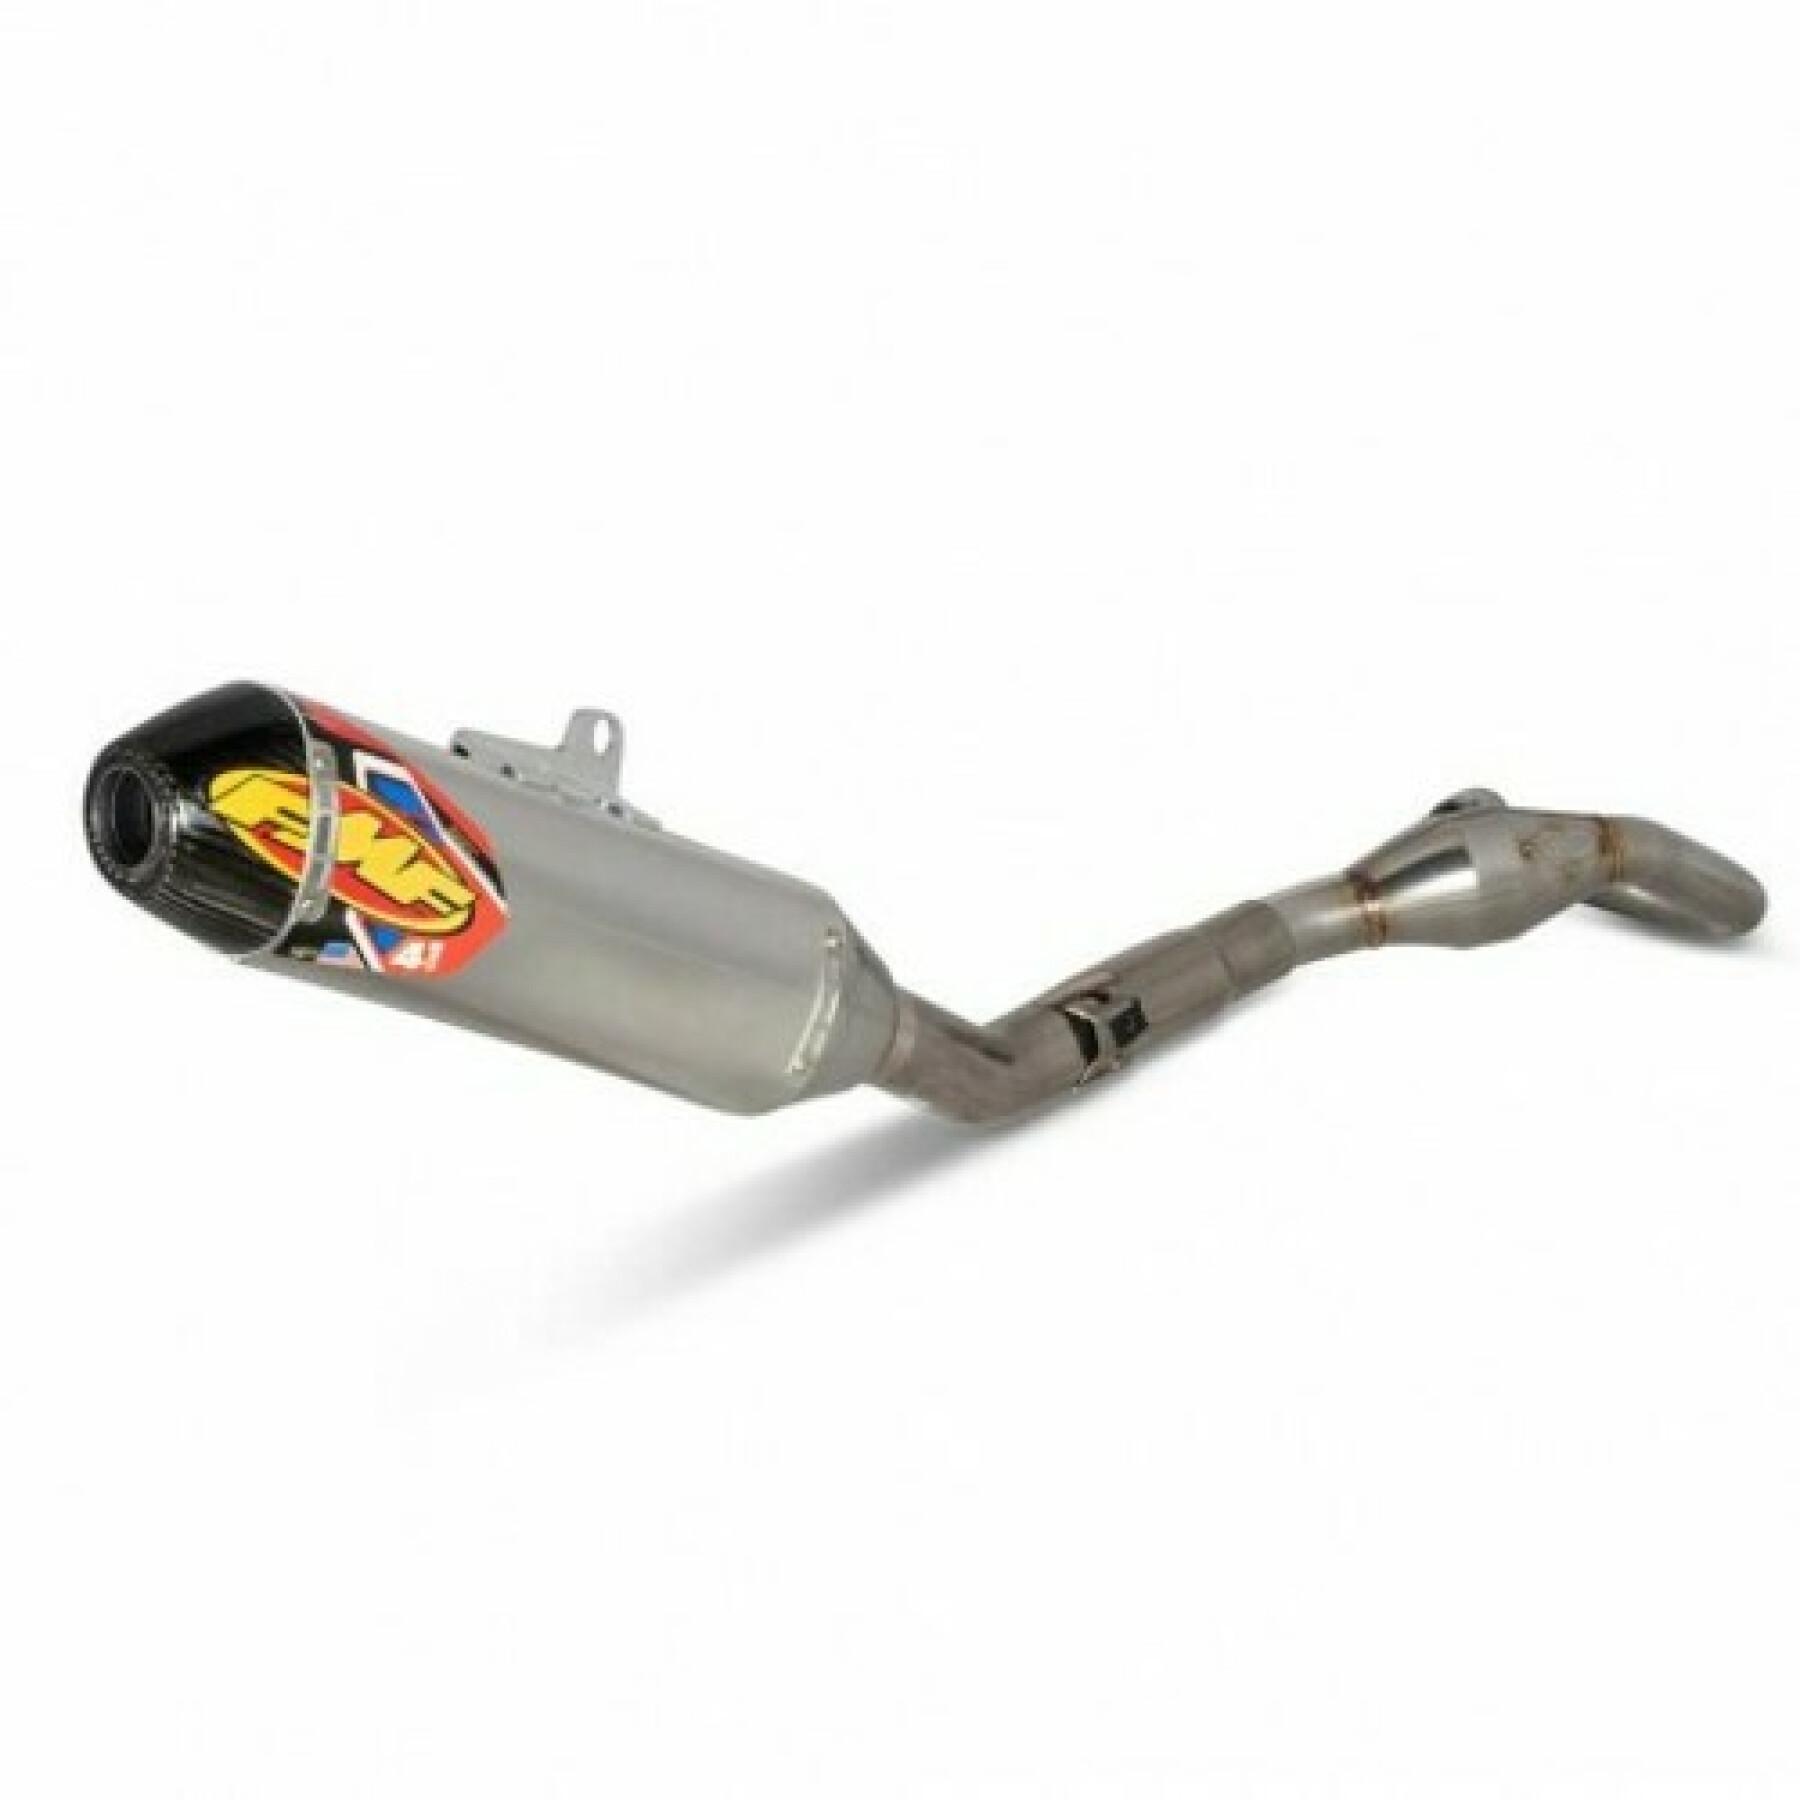 motorcycle exhaust FMF kaw kx250f'17-20 s/s alum fact-4.1 rct w/r.carbon cap complete exhaust system w/ss megabomb header